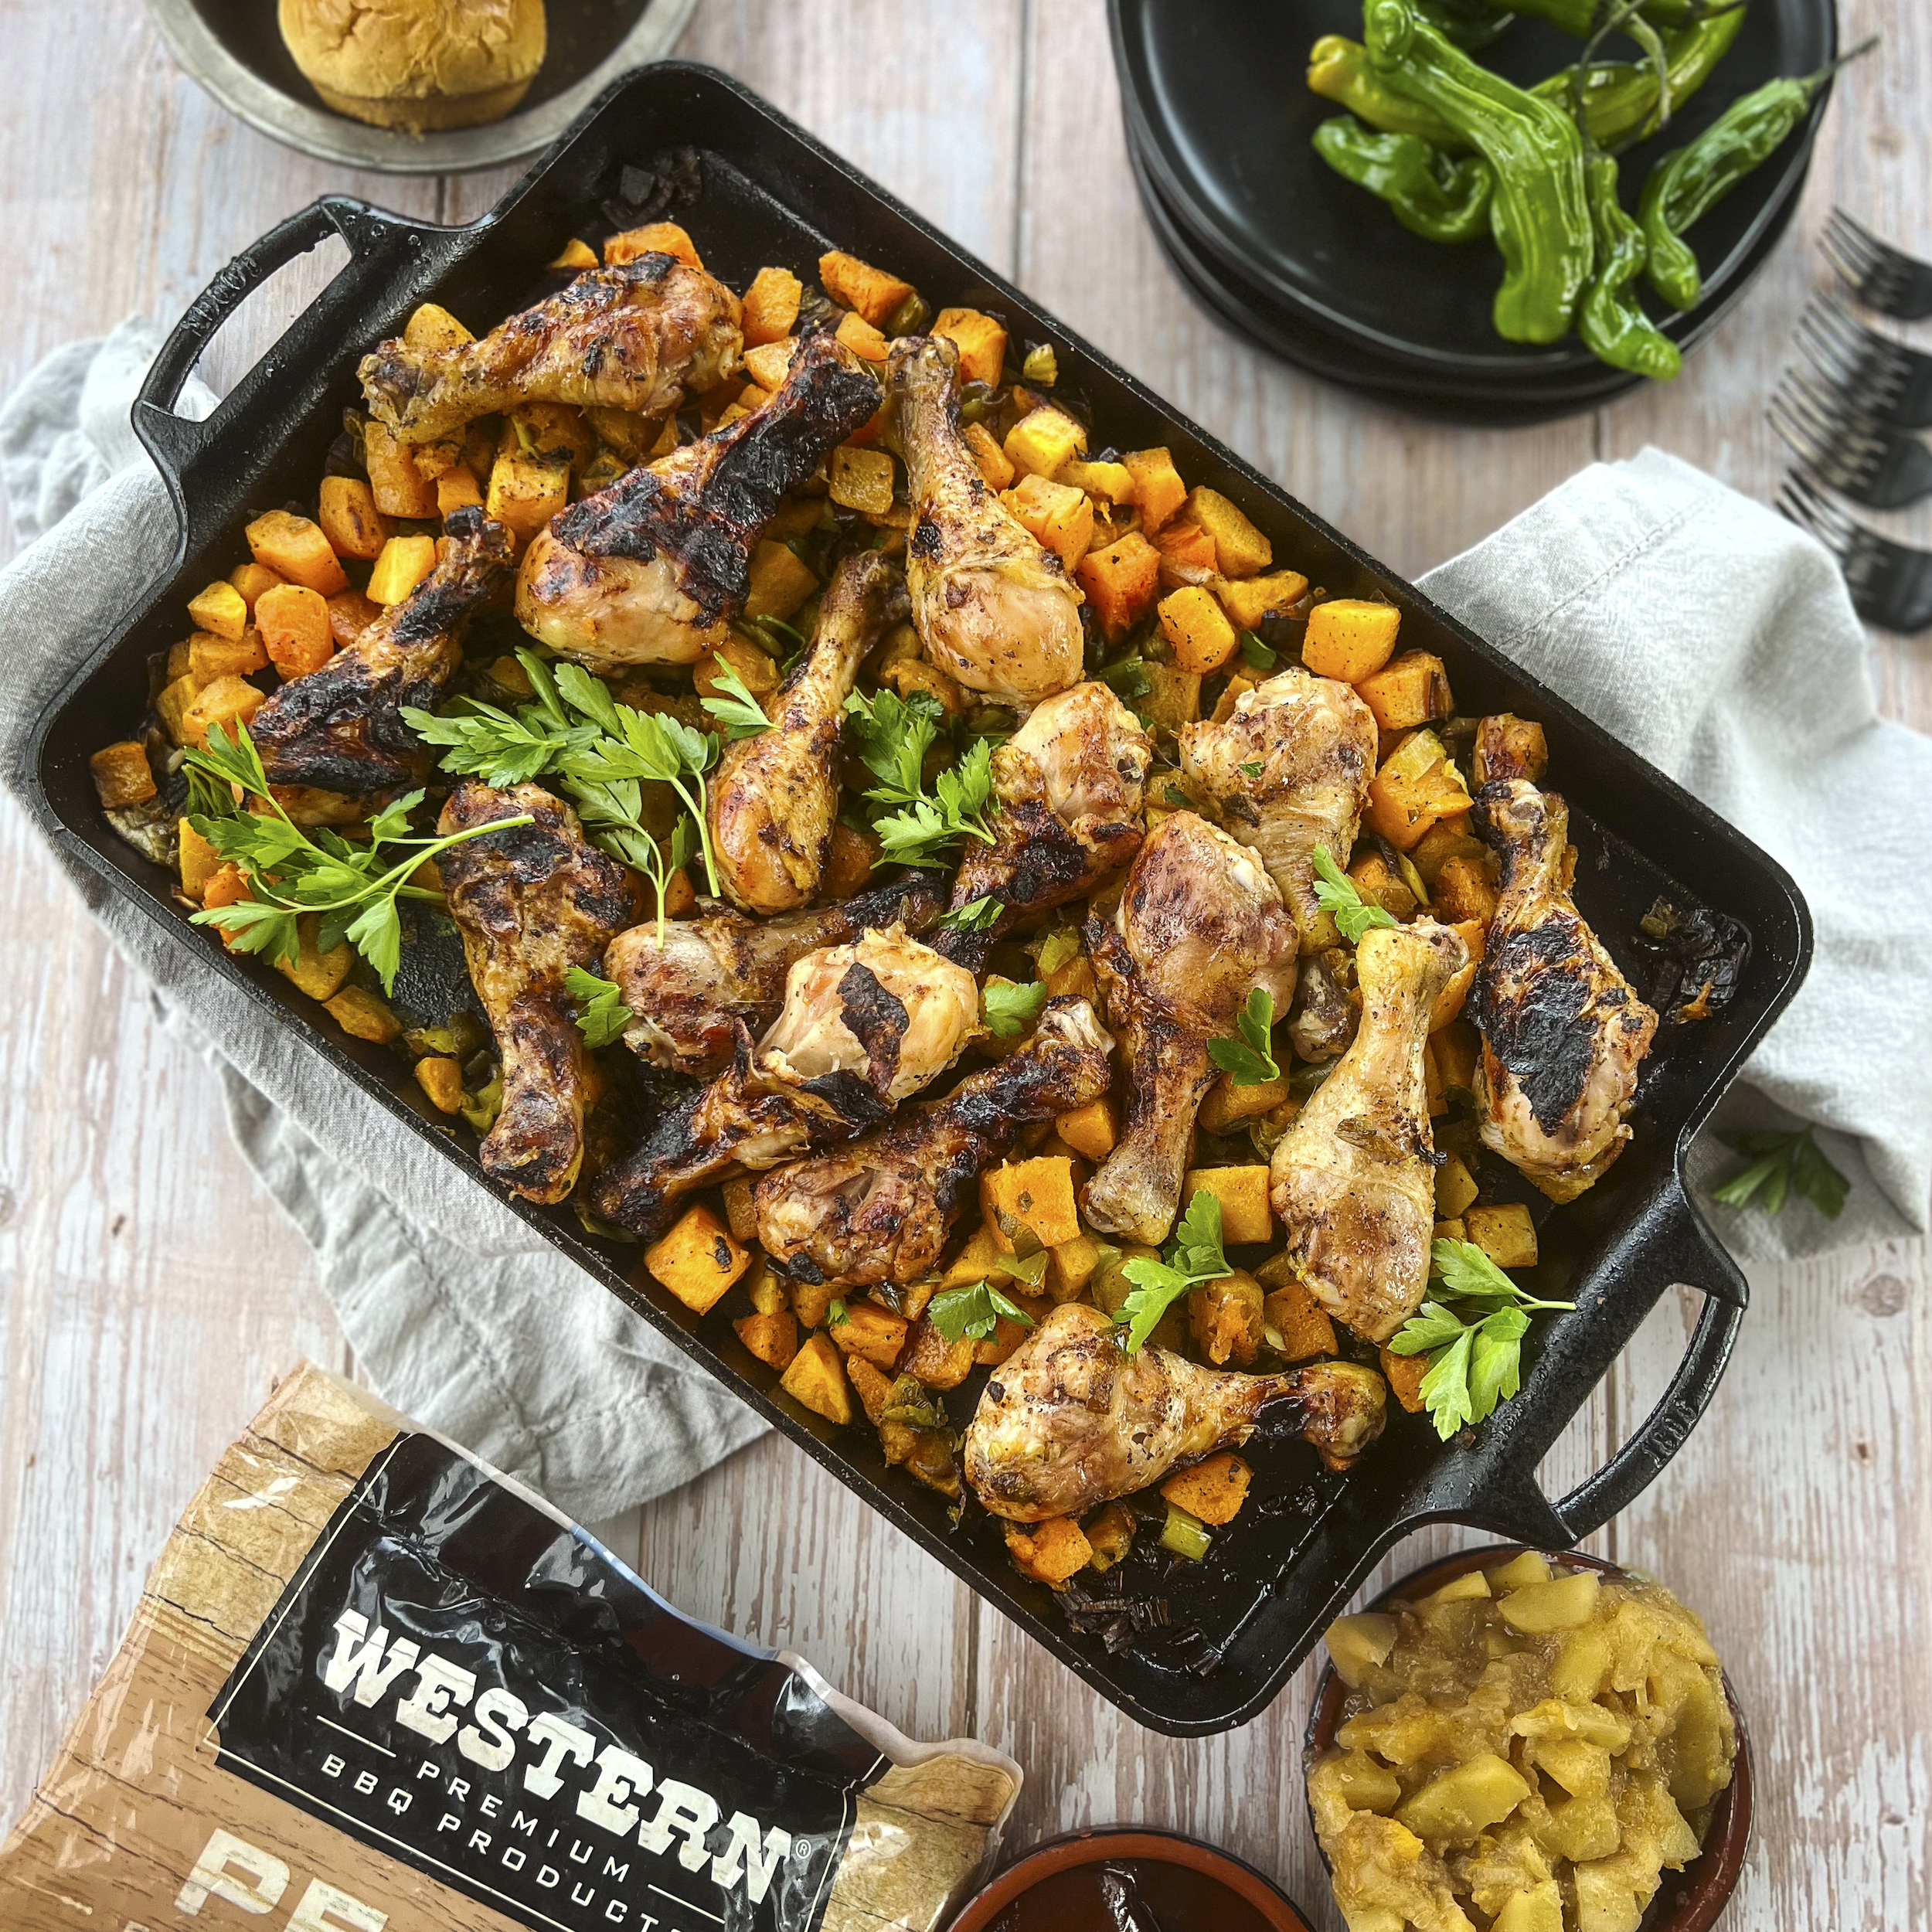 A cast iron pan filled with roasted butternut squash and smoked chicken.